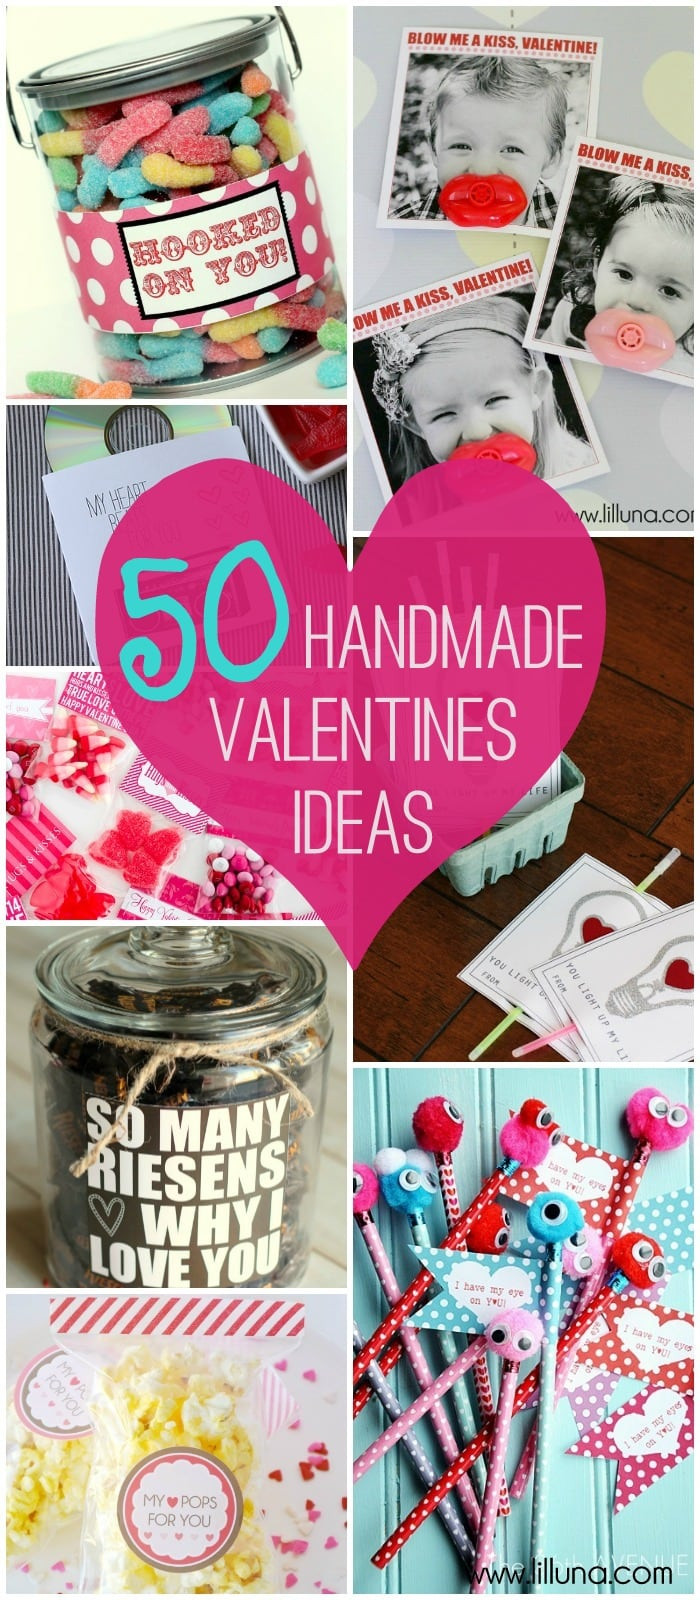 Valentine Ideas Gift
 14 Gifts of Valentines with Free Printables plus MORE